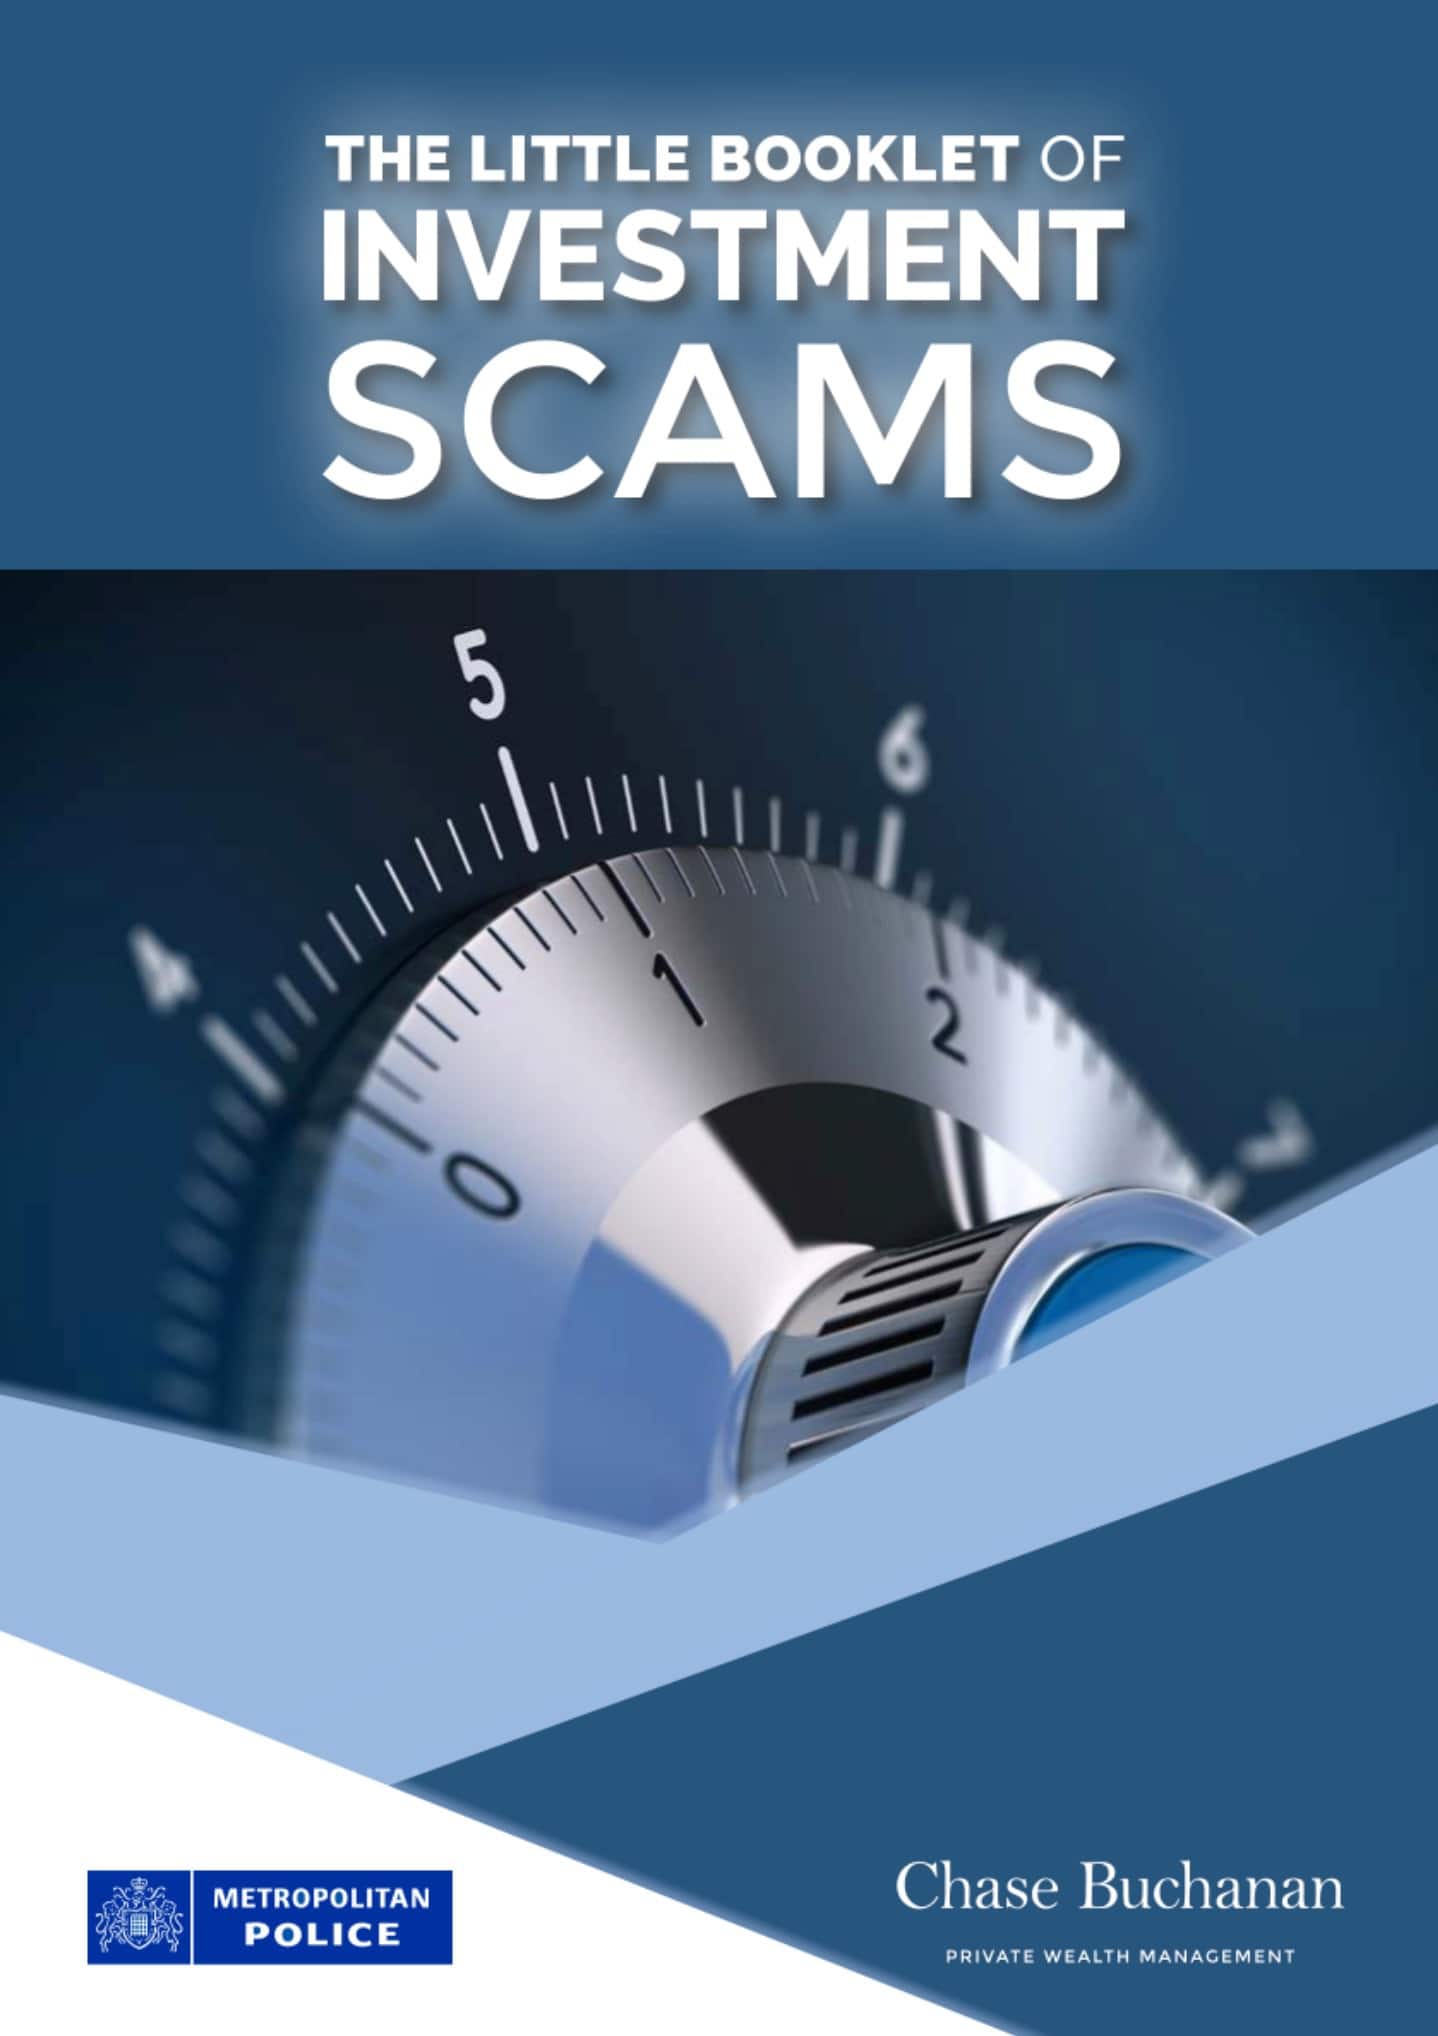 The Expert Insight Into Investment Scams Be In The Know!